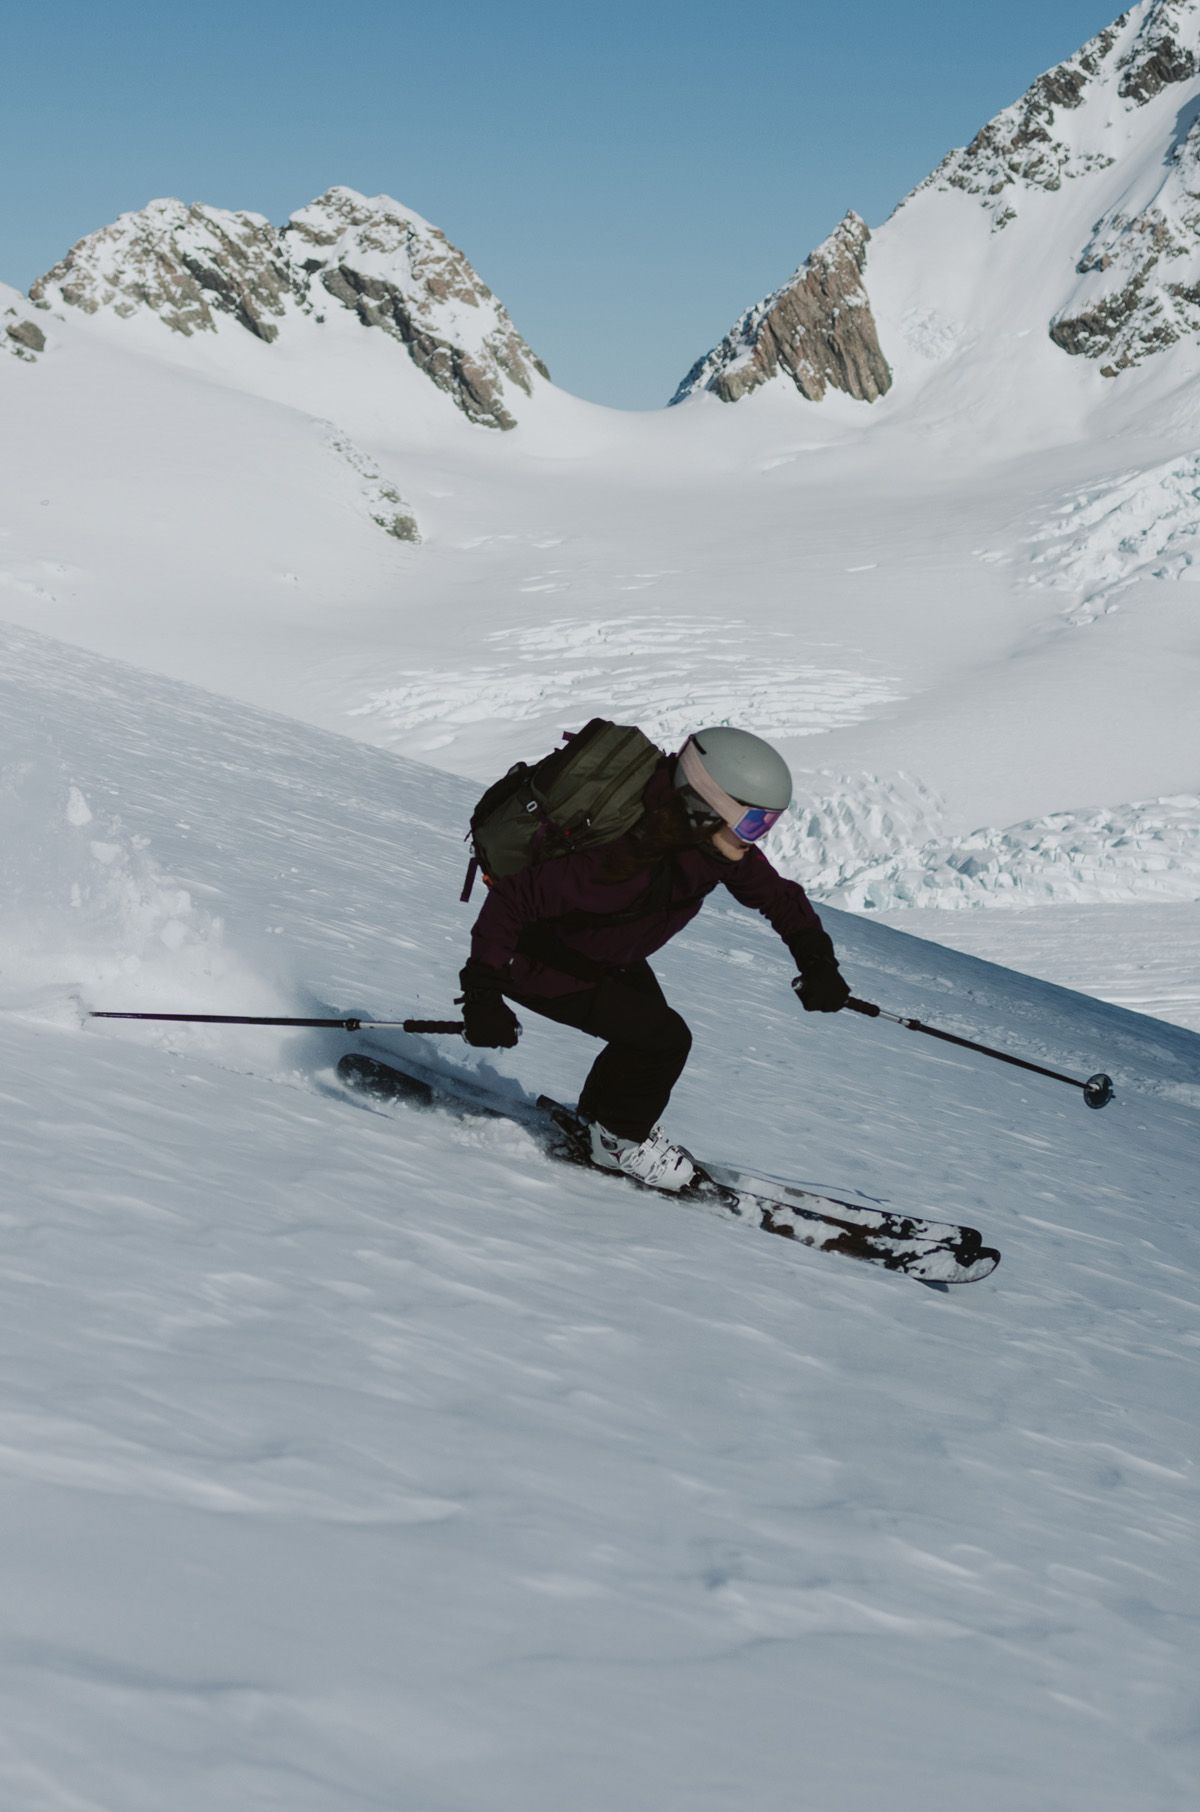 Person skiing down a snowy mountain.